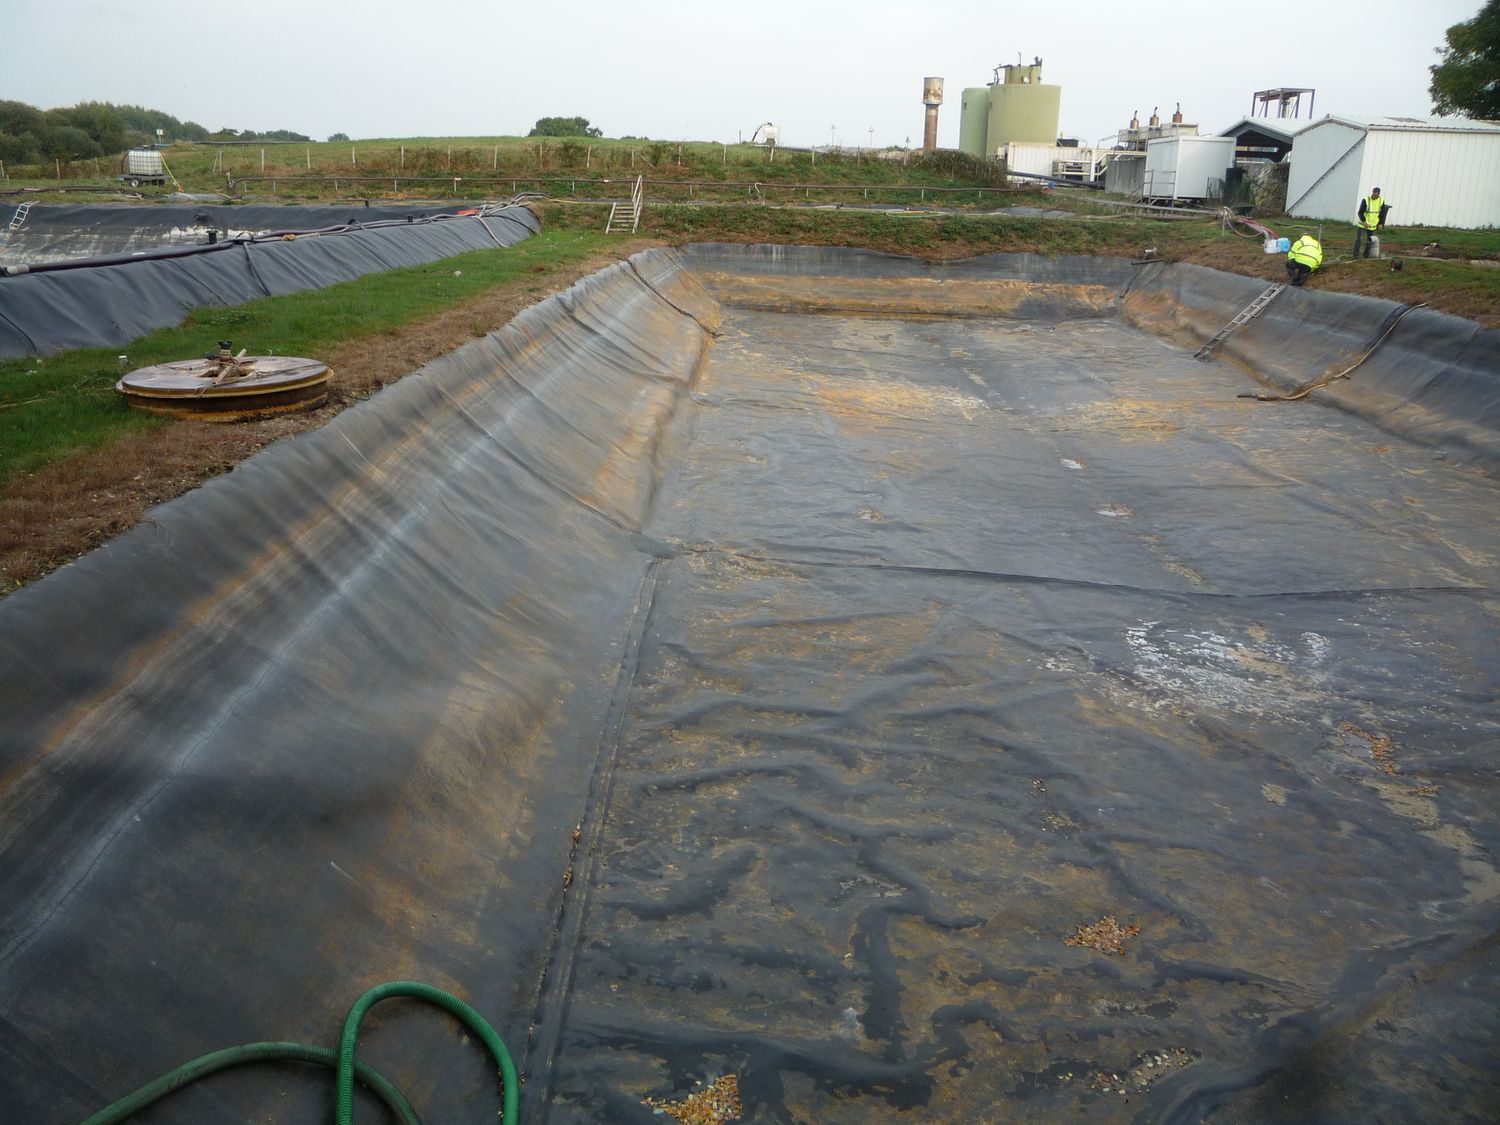 Audit of the leachate pond in a municipal landfill